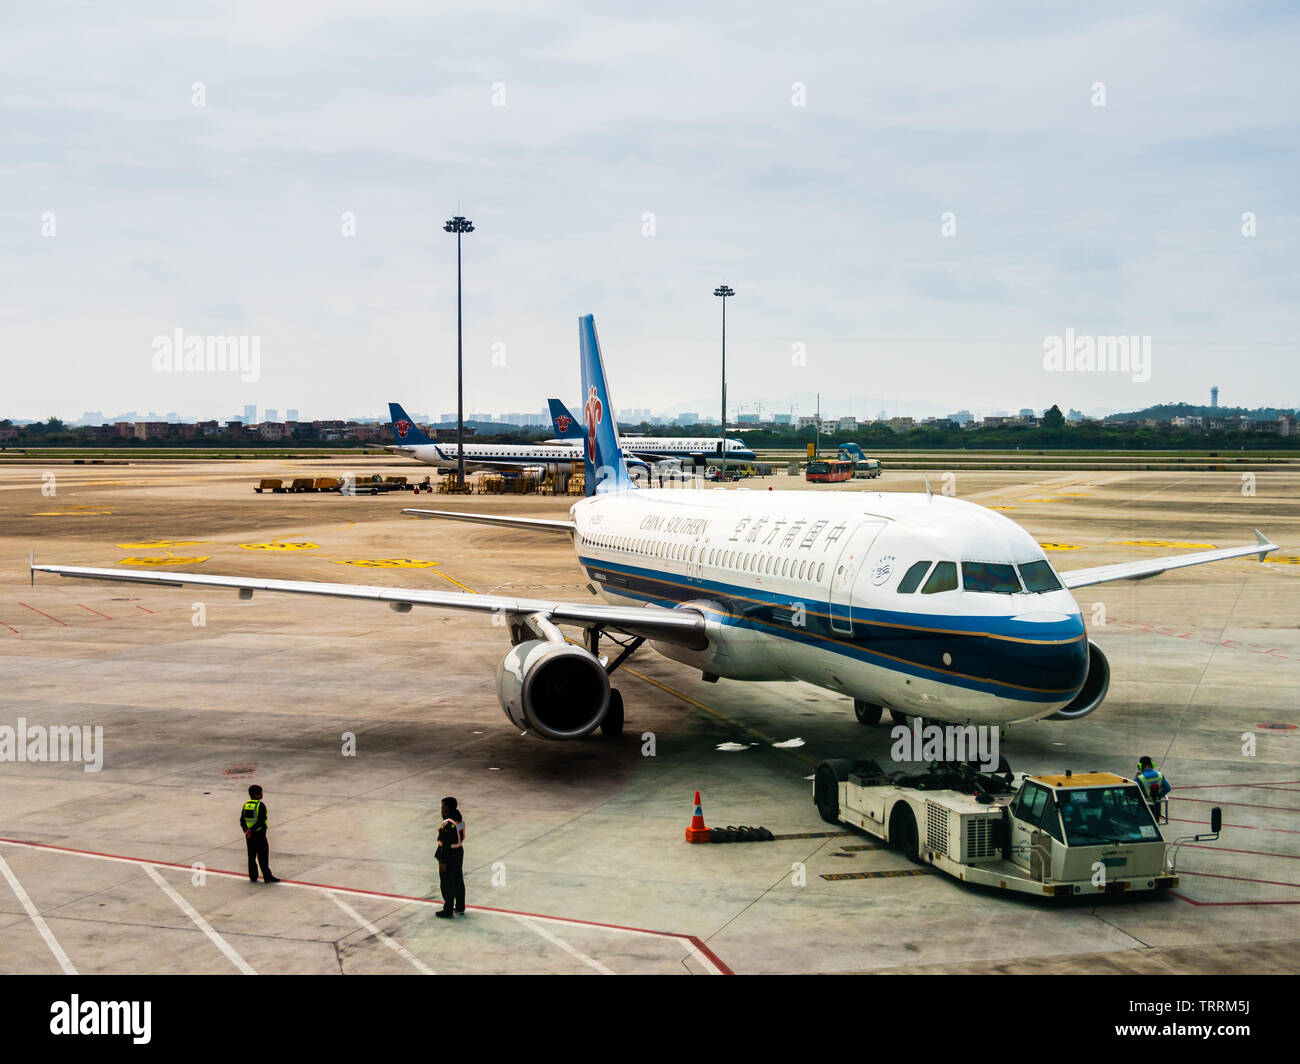 BAIYUN, GUANGZHOU, CHINA - 10 MAR 2019 - A China Southern Airlines airplane / plane on the tarmac at Baiyun Airport. China Southern is one of the top Stock Photo